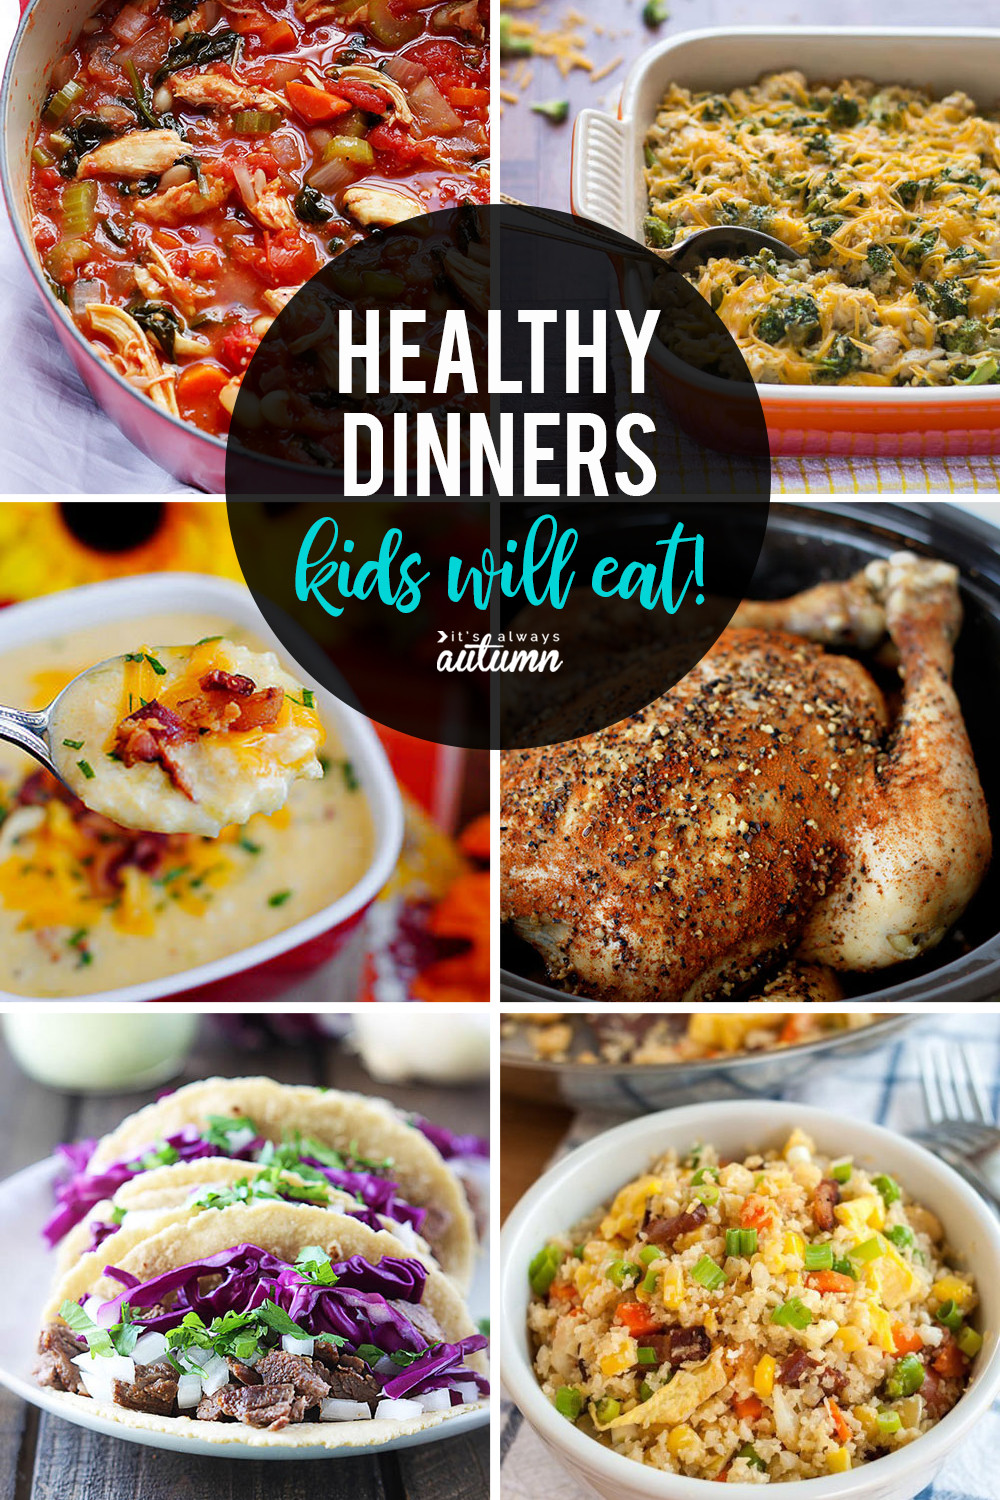 Easy Healthy Kid Friendly Recipes
 20 healthy easy recipes your kids will actually want to